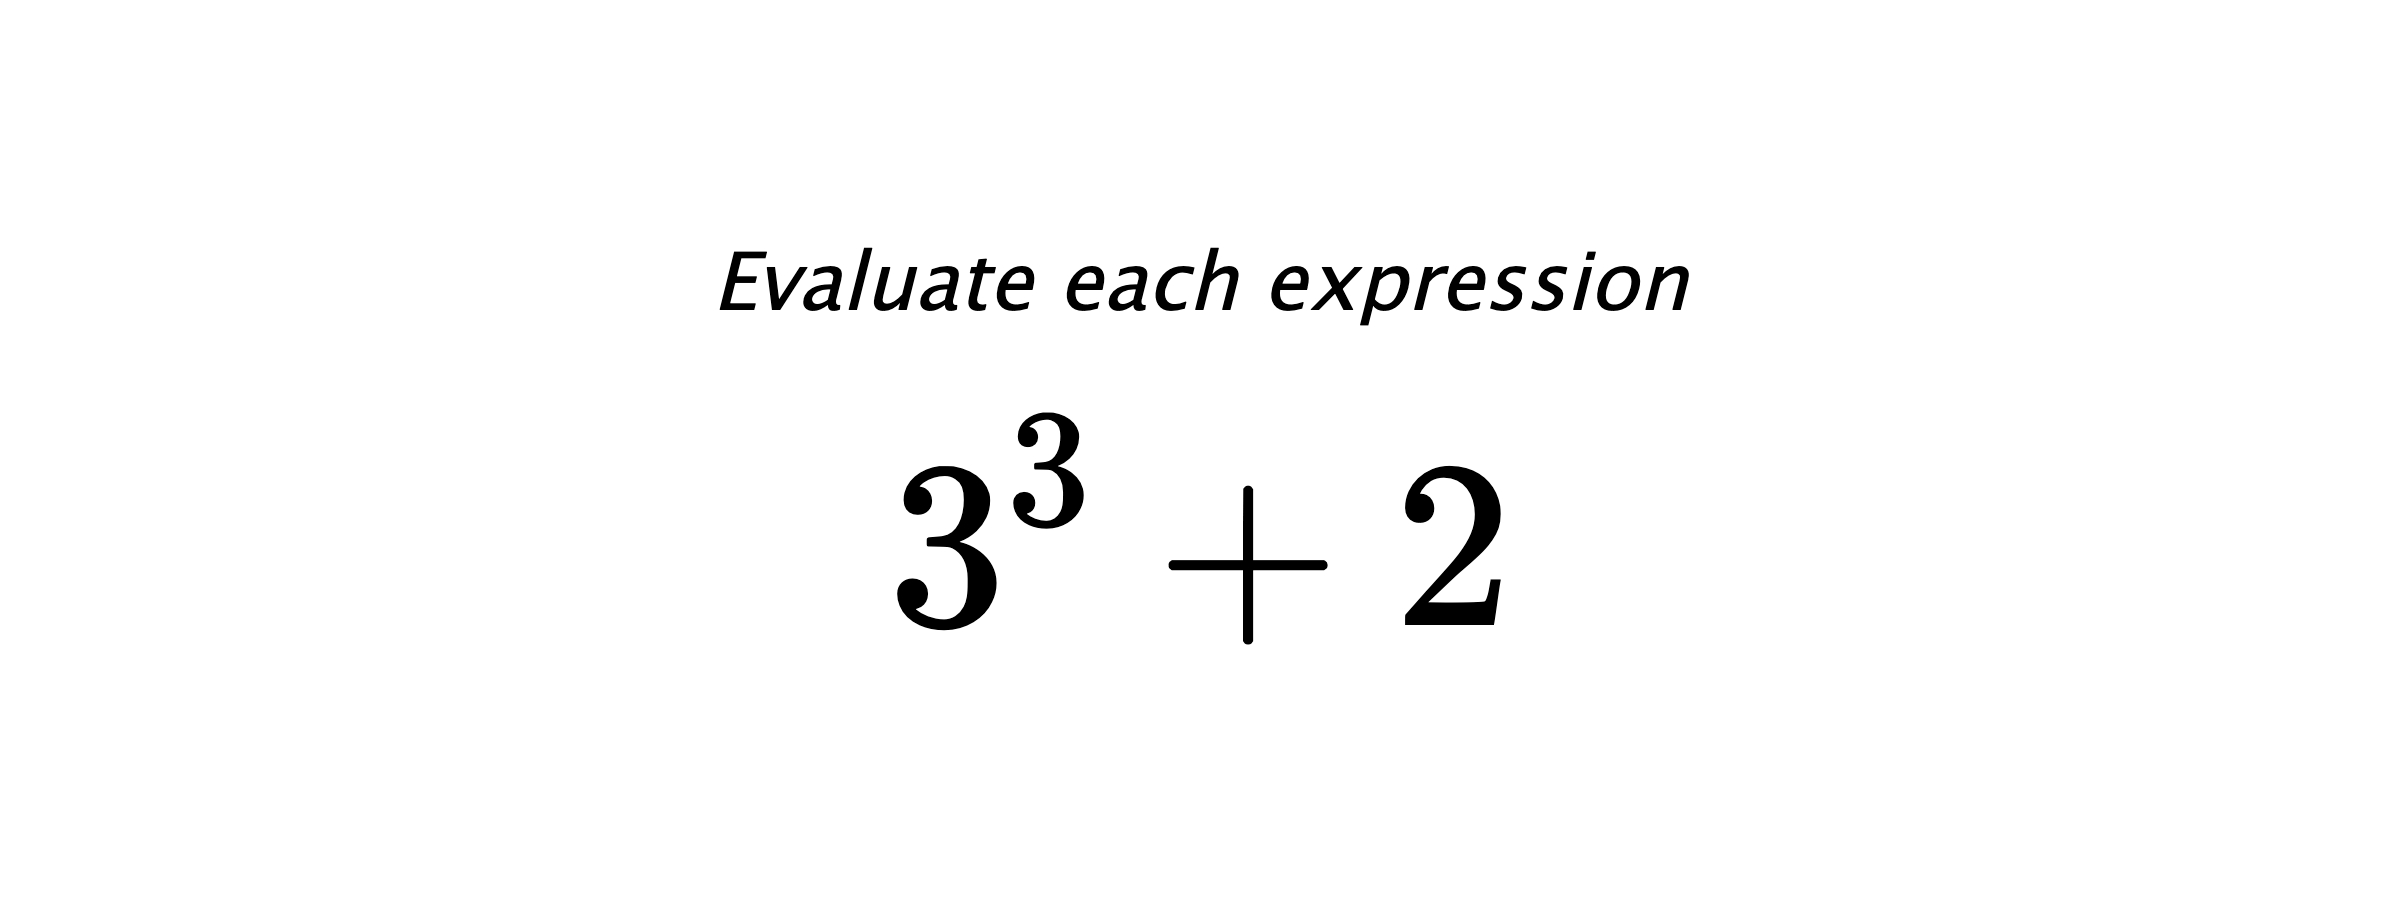 Evaluate each expression $ 3^3 + 2 $